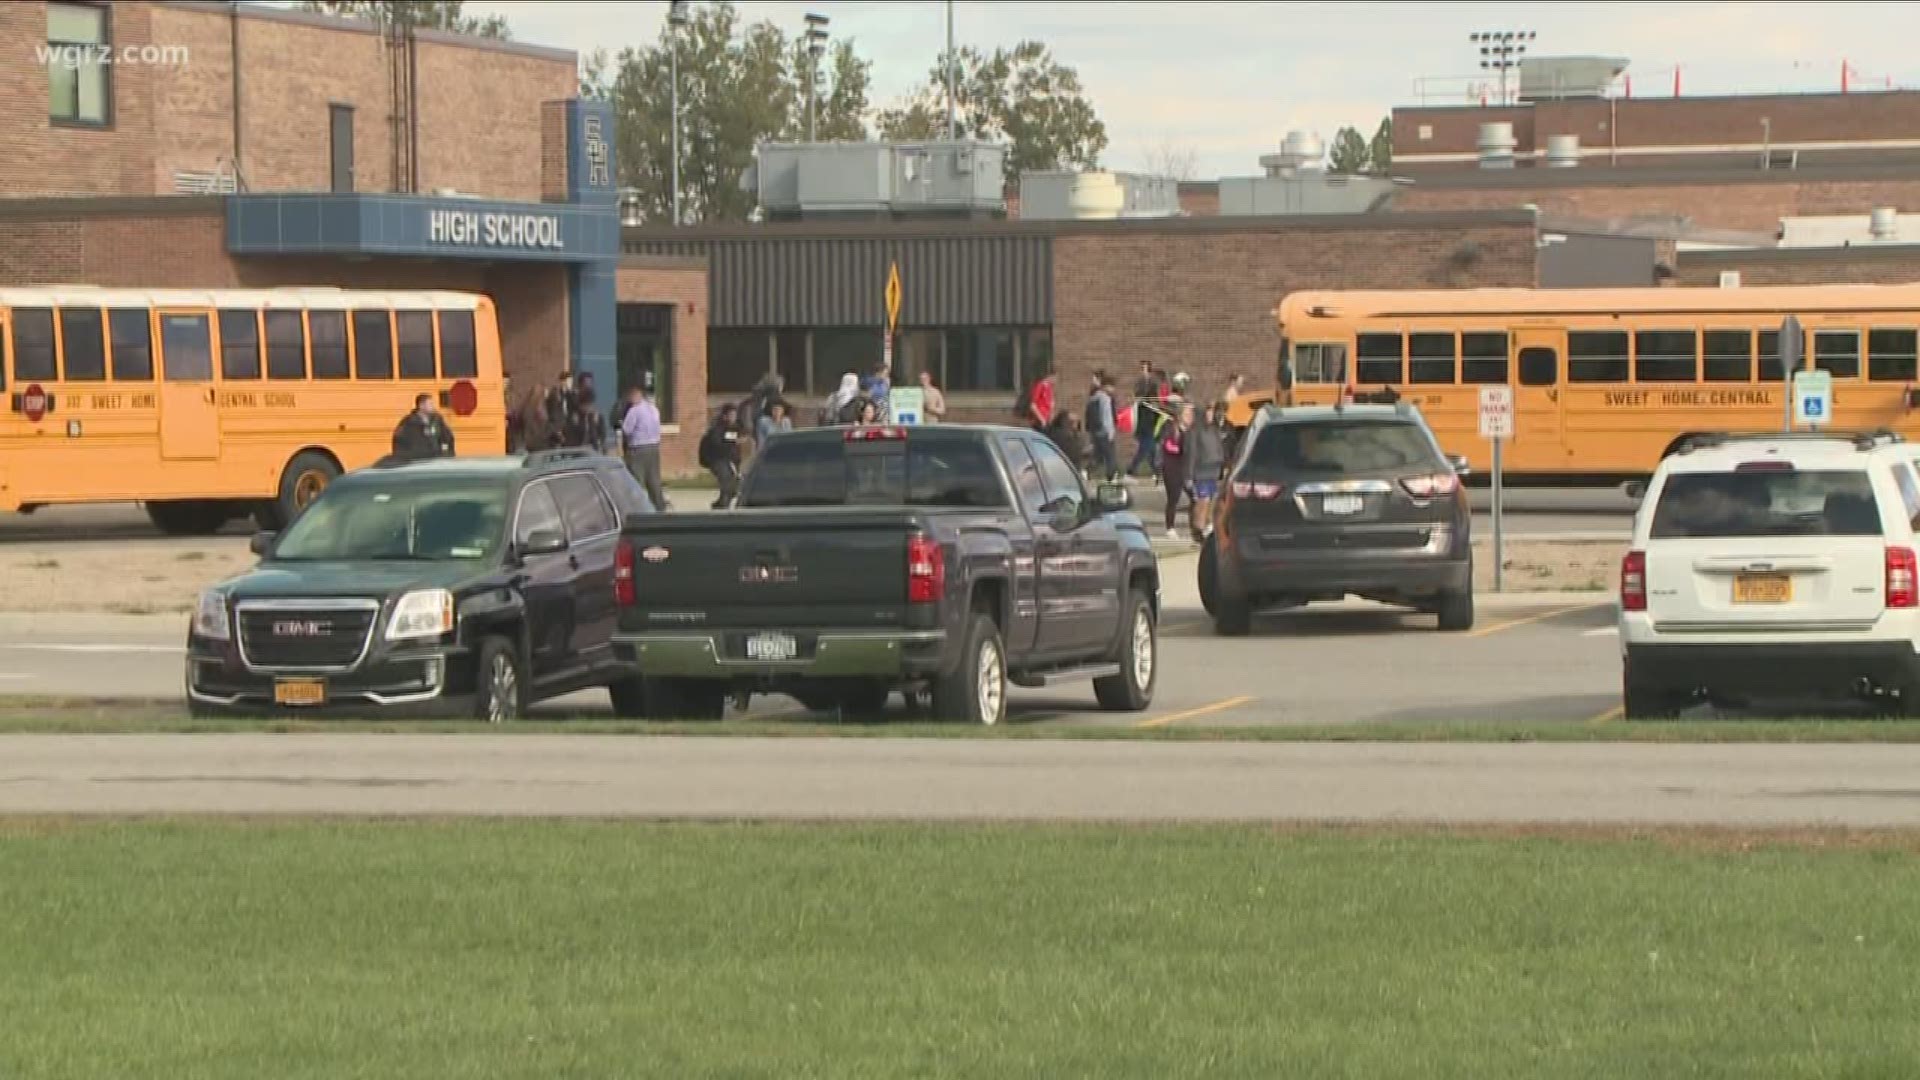 Lockdown Lifted At Sweet Home High School